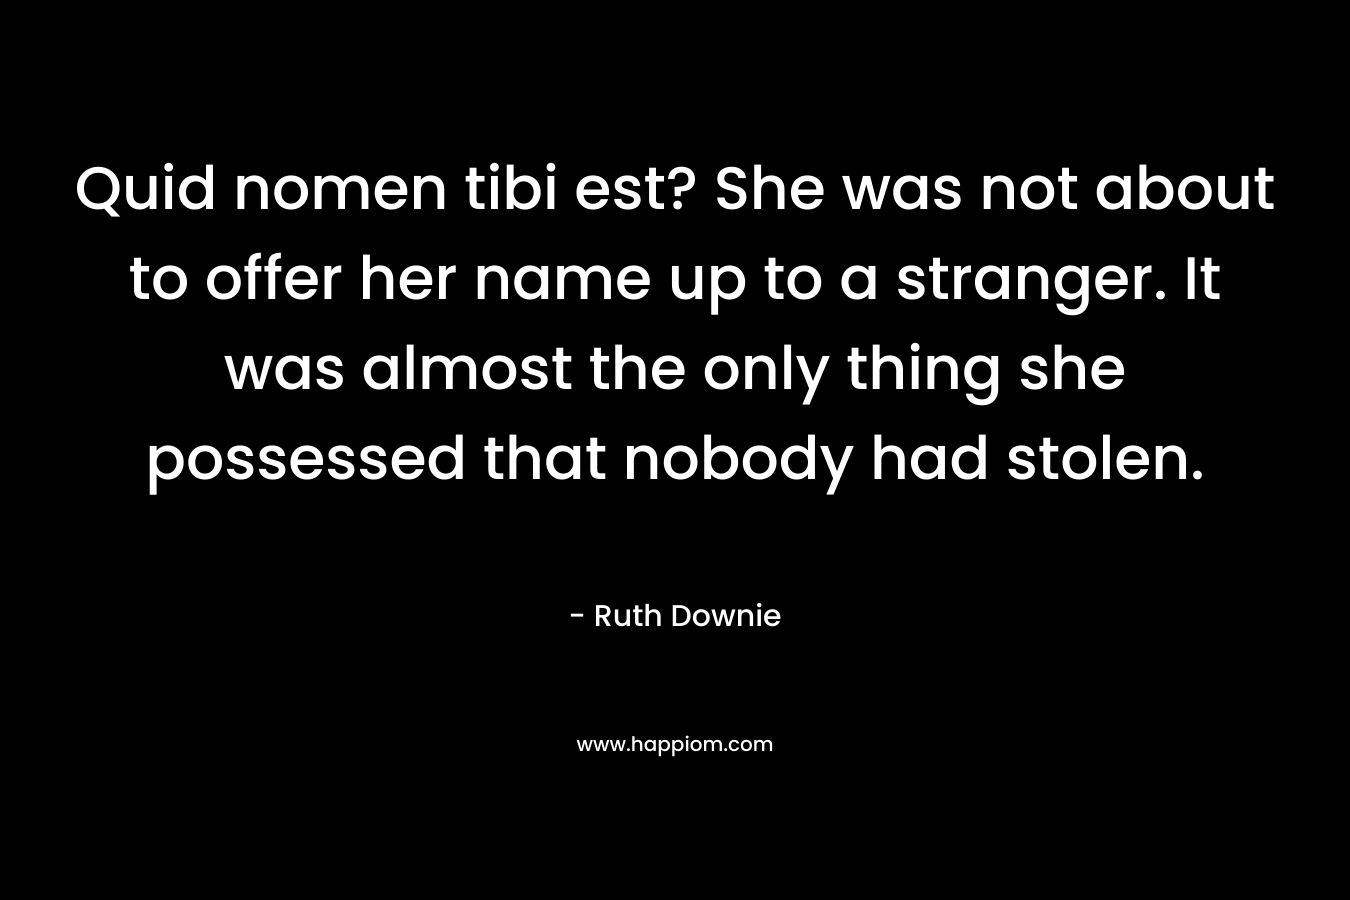 Quid nomen tibi est? She was not about to offer her name up to a stranger. It was almost the only thing she possessed that nobody had stolen. – Ruth Downie